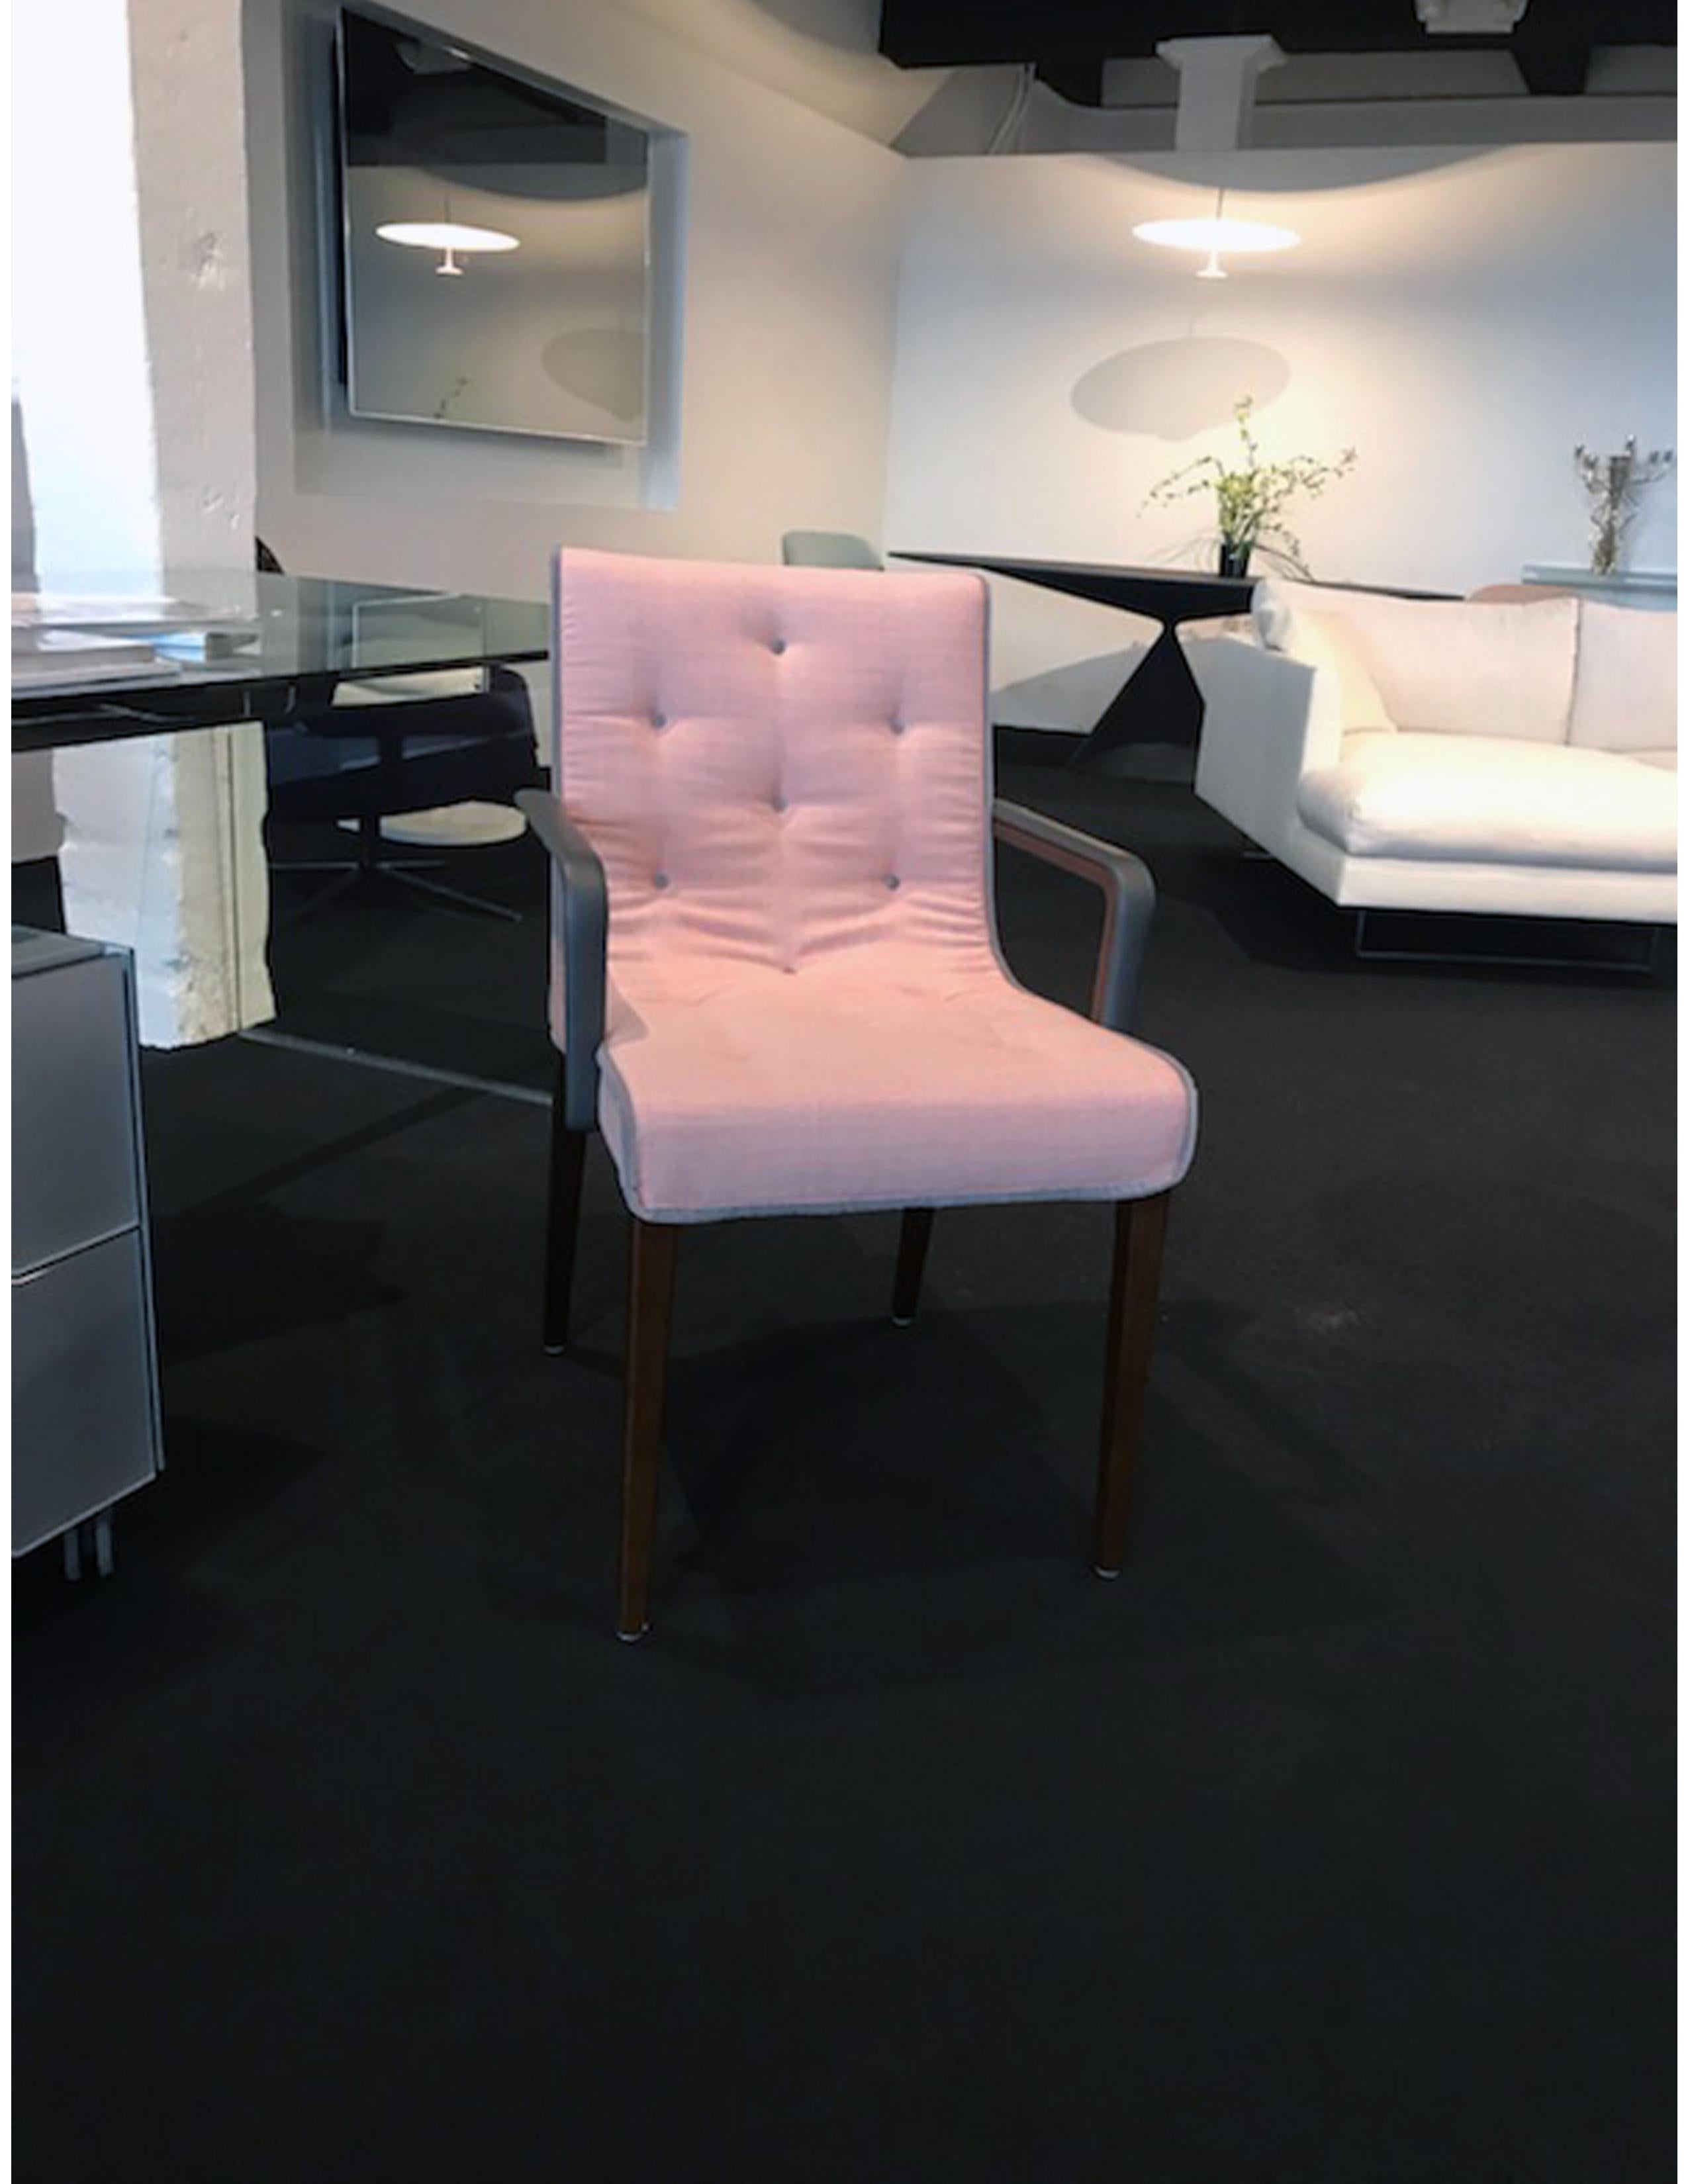 ONE CHAIR.
Leslie low back dining chair
(Stitched) with arms
Arms upholstered in nappa flint leather
Chair upholstered in arena rose
#S15KV0614
Piping and buttons in com
COM: Designtex 